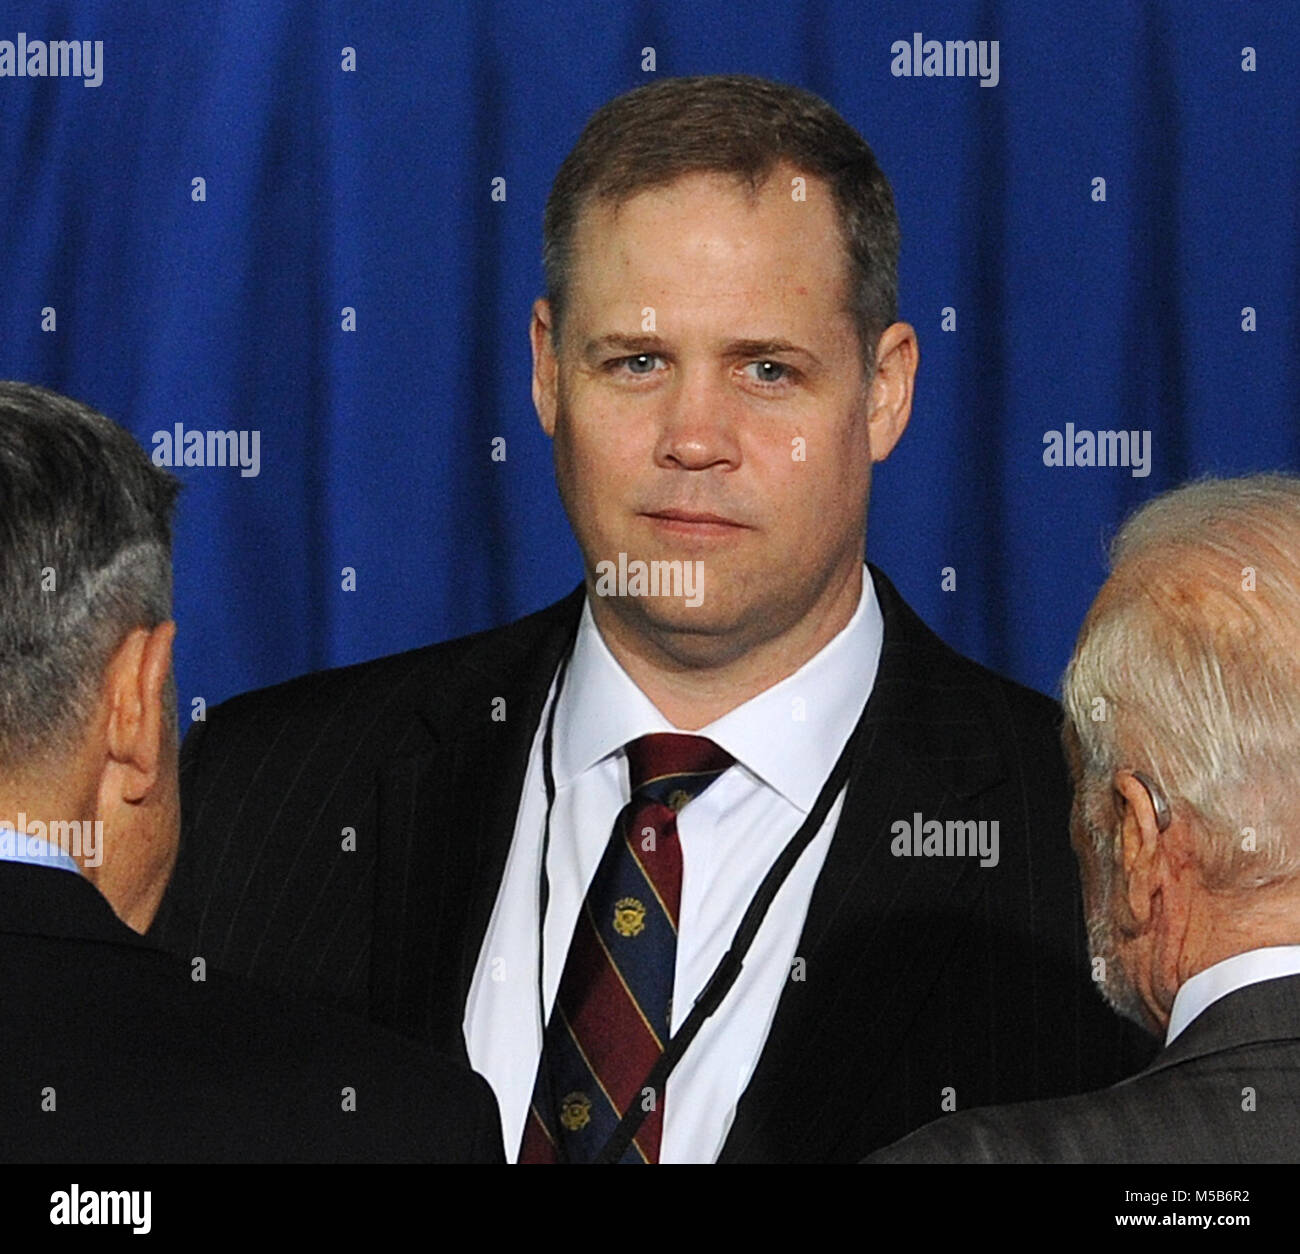 Kennedy Space Center, USA. February 21, 2018 - Republican Congressman Jim Bridenstine of Oklahoma, President Donald Trump's controversial nominee for NASA Administrator, speaks with attendees prior to the second meeting of the National Space Council, chaired by Vice President Mike Pence,. The Trump administration re-established the council in June, 2017. Credit: Paul Hennessy/Alamy Live News Stock Photo